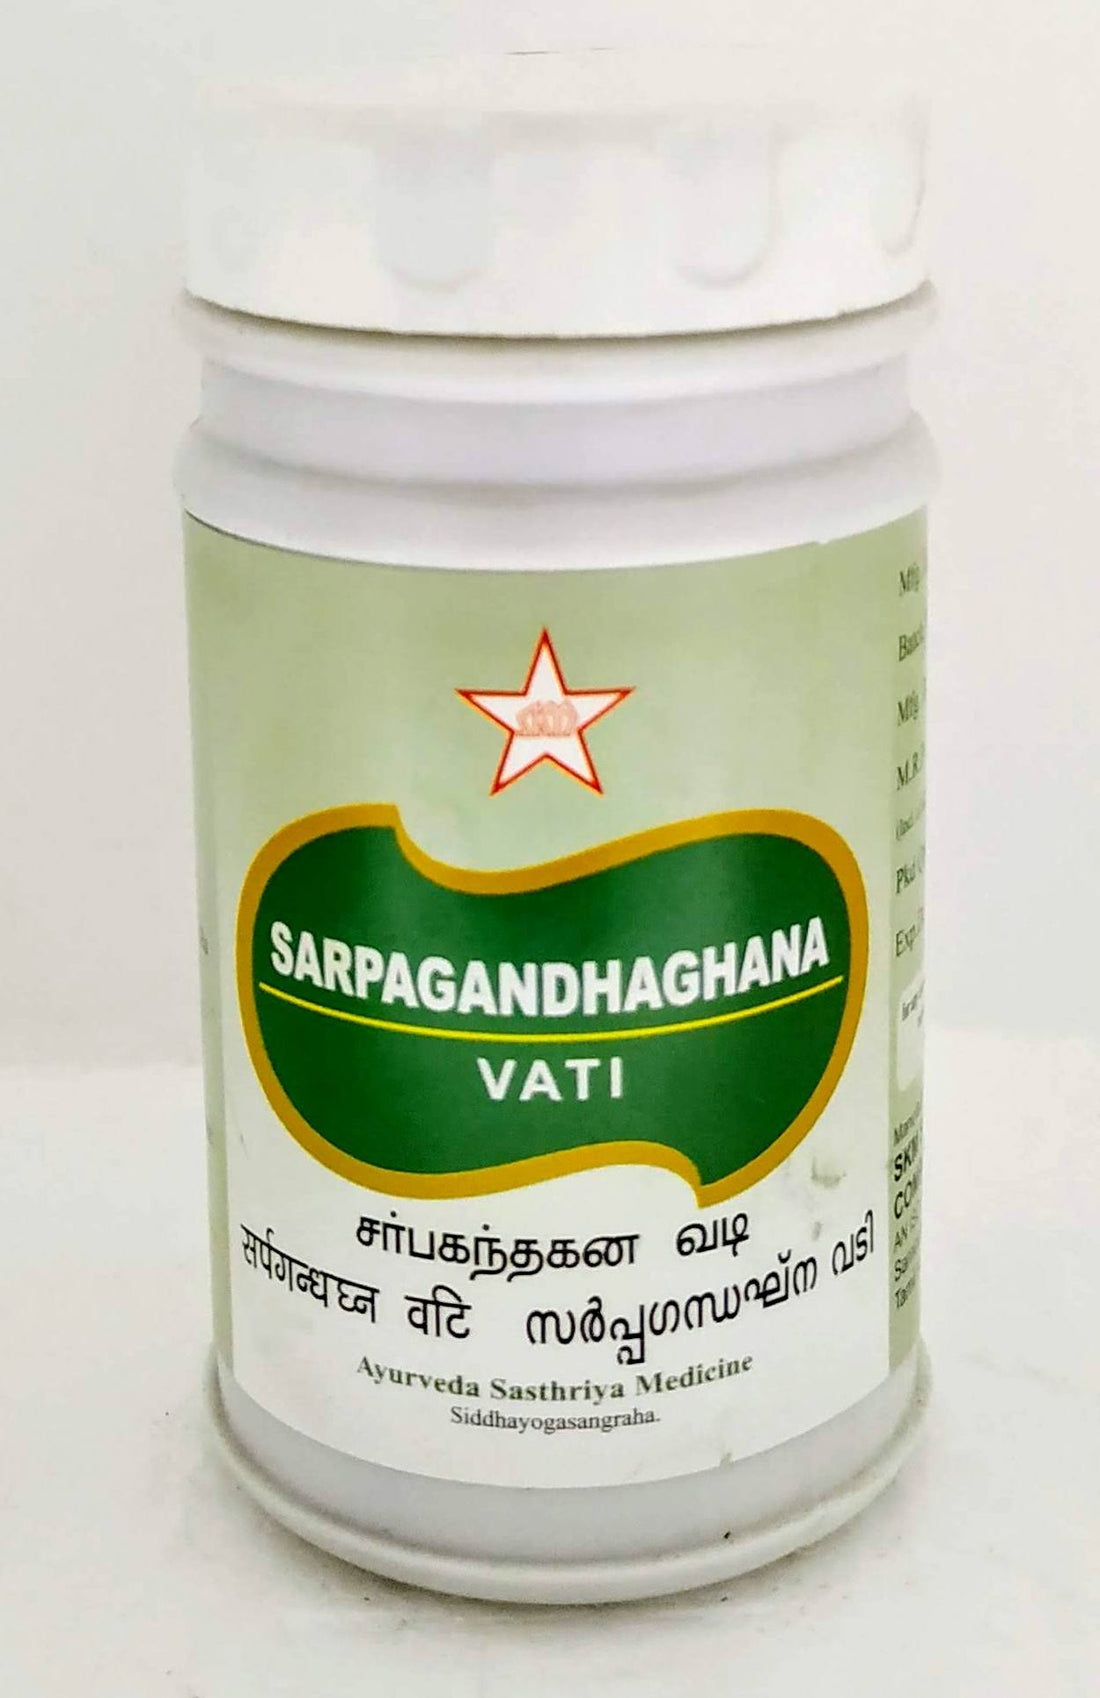 Shop Sarpagandhan Vati Tablets - 100Tablets at price 120.00 from SKM Online - Ayush Care